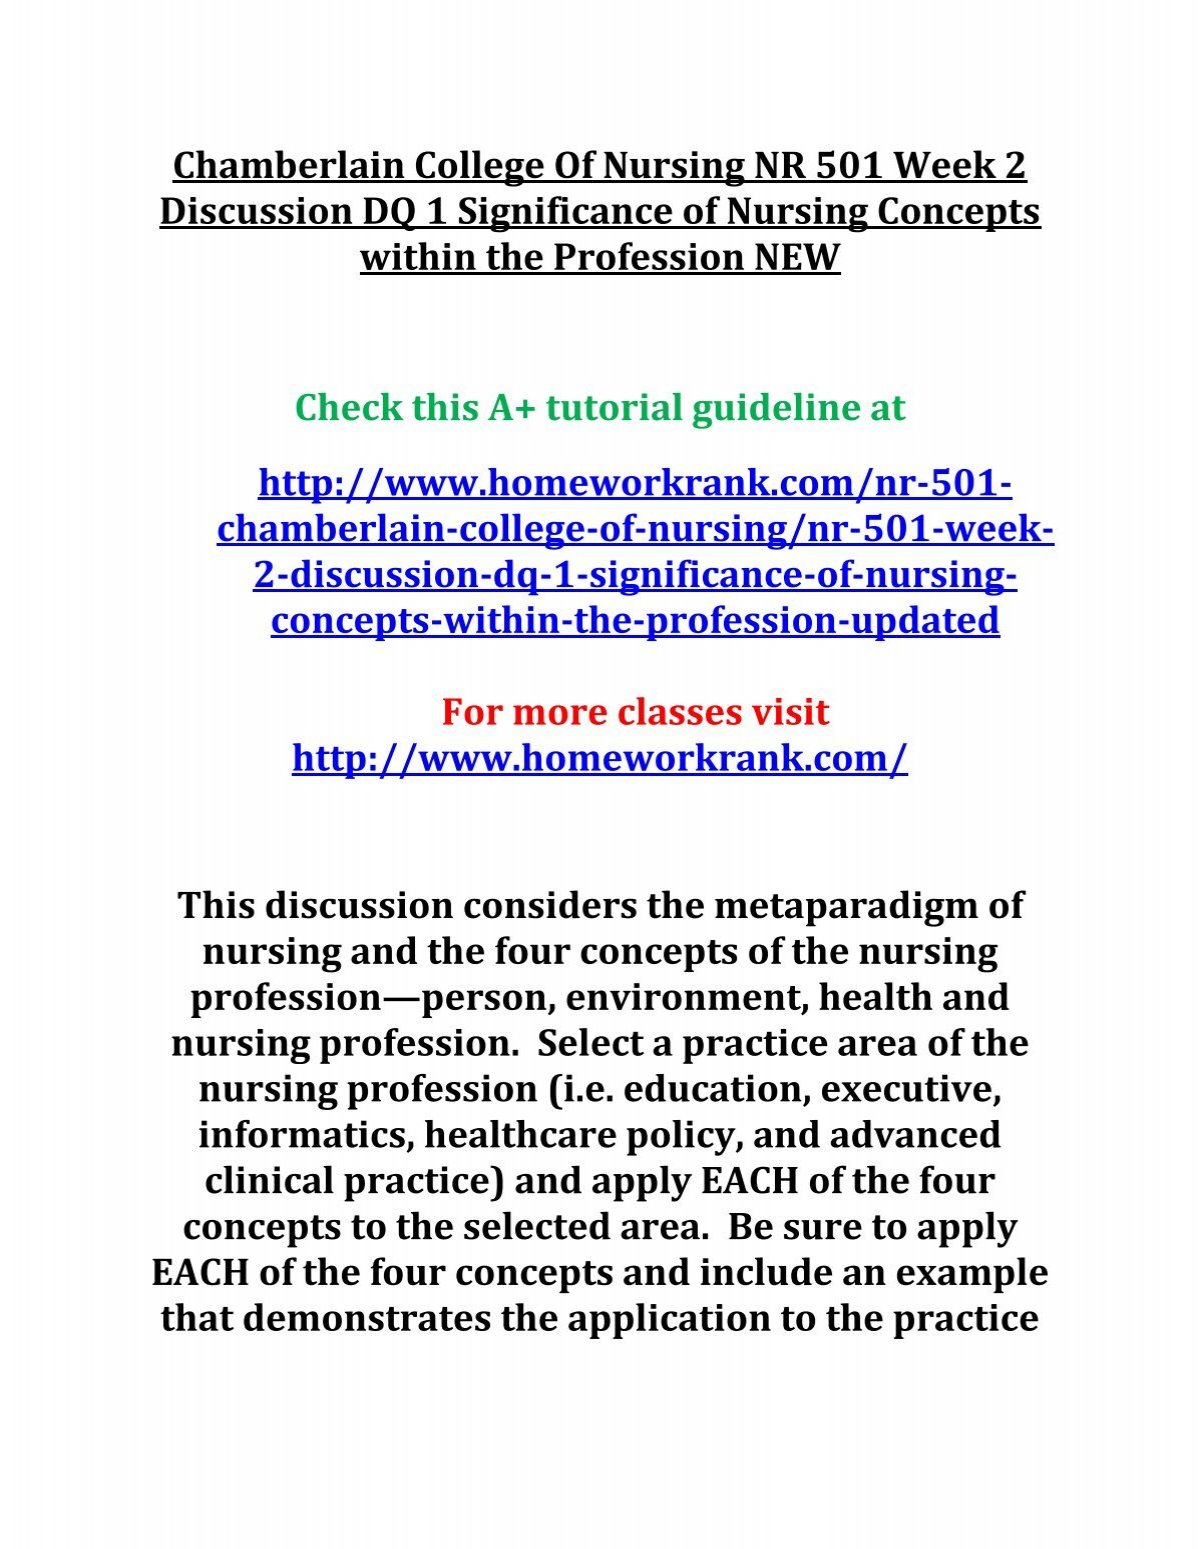 Chamberlain College Of Nursing Nr 501 Week 2 Discussion Dq 1 Significance Of Nursing Concepts Within The Profession New